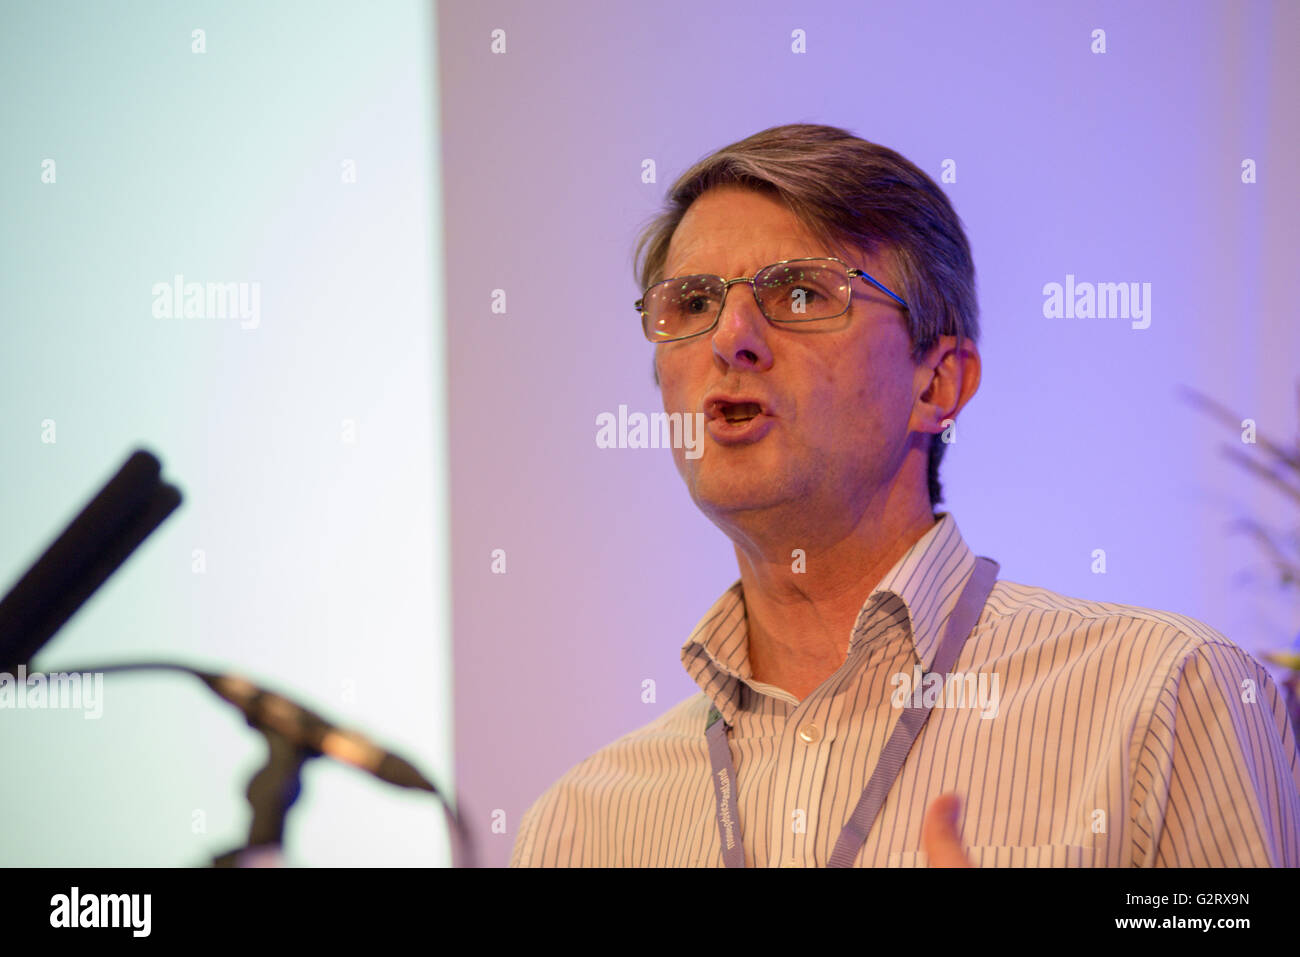 Robert Skinner, Chief Executive, Lending Standards Board speaking at conference Stock Photo